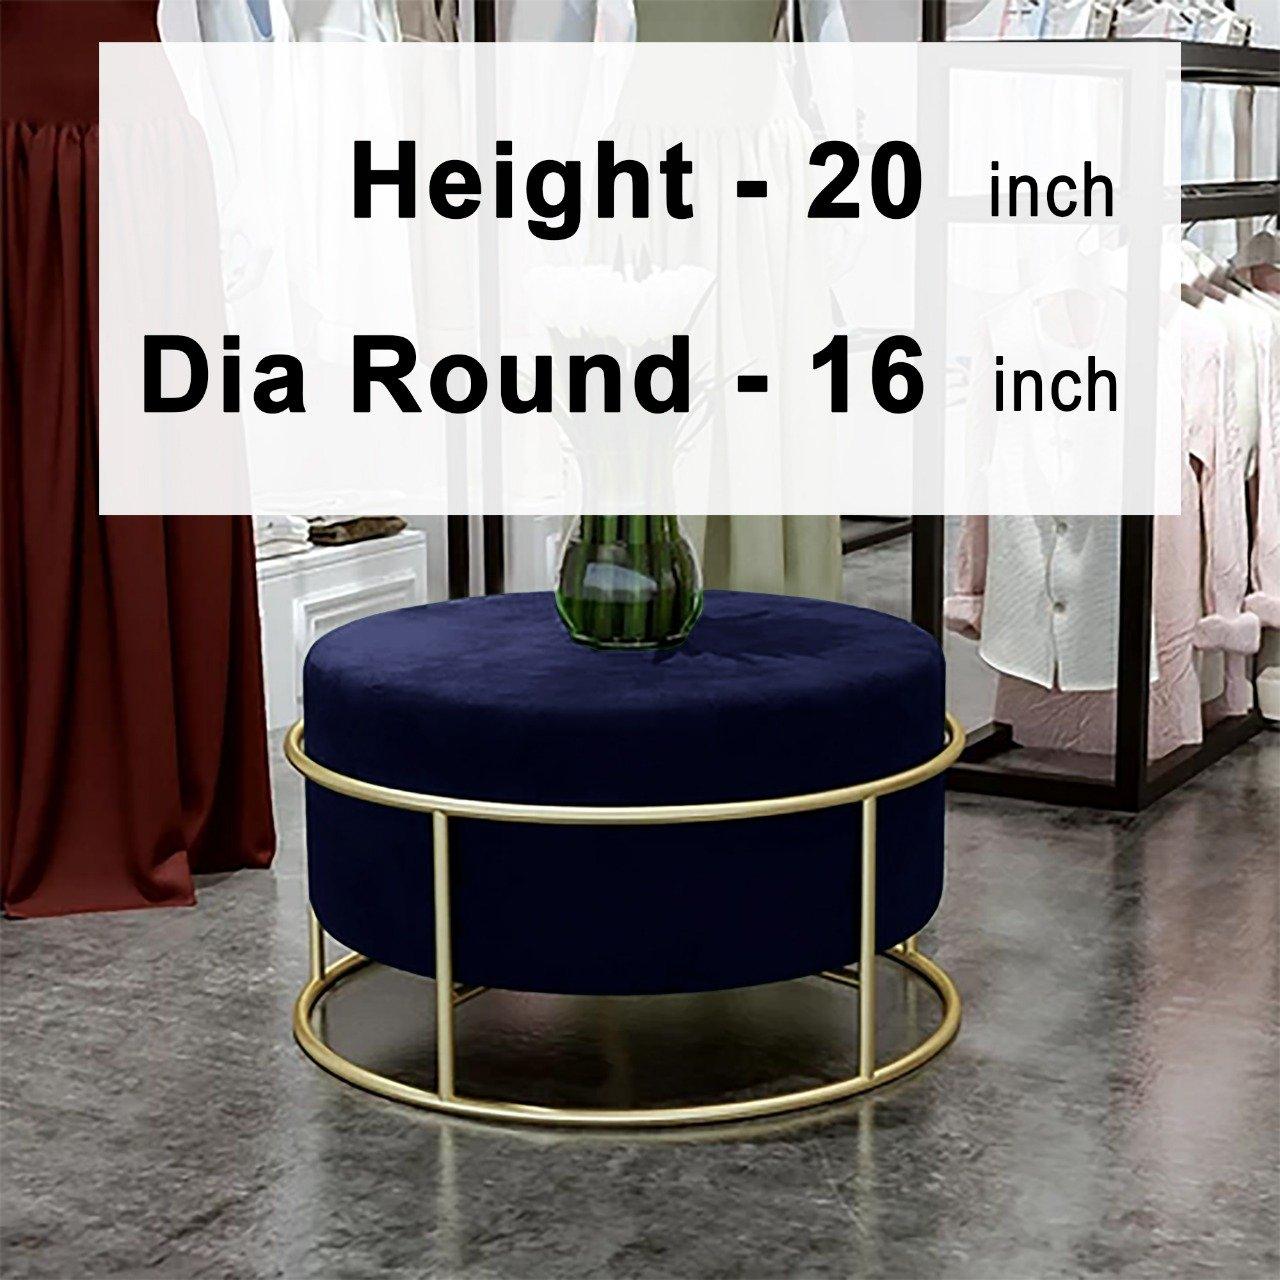 Luxury Wooden Round stool With Steel Stand -301 - 92Bedding